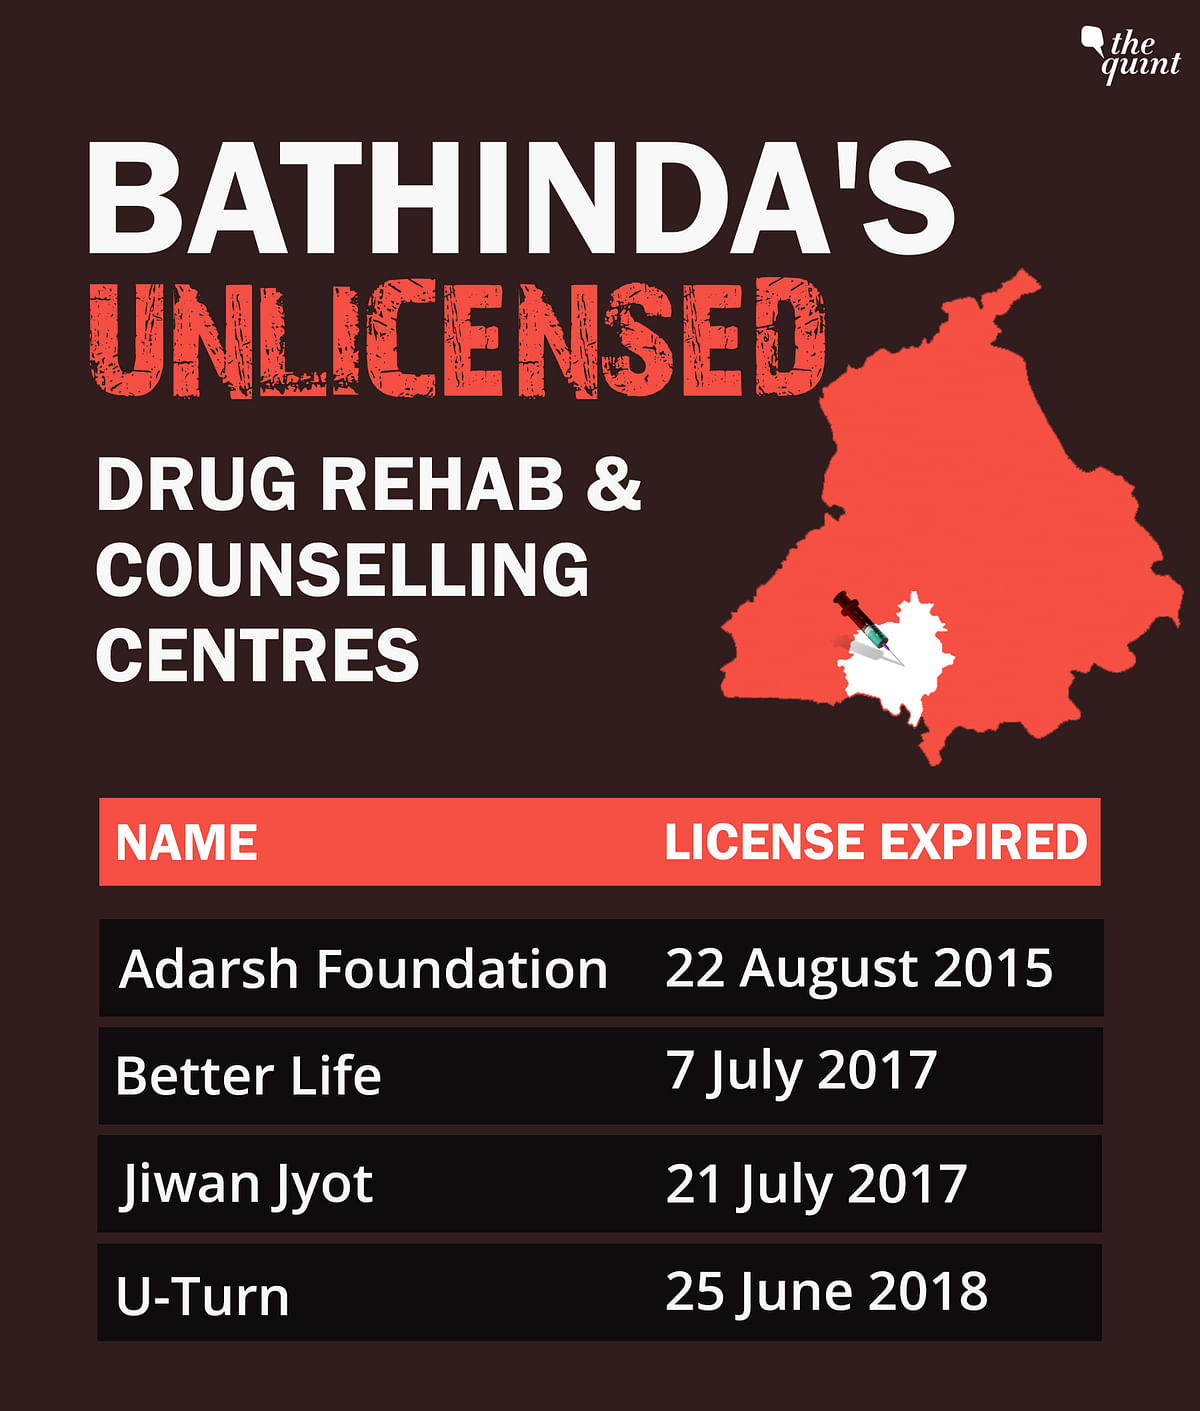 In Depth: Private rehab centres that charge addicts ten times the amount govt centres do, found violating rules.